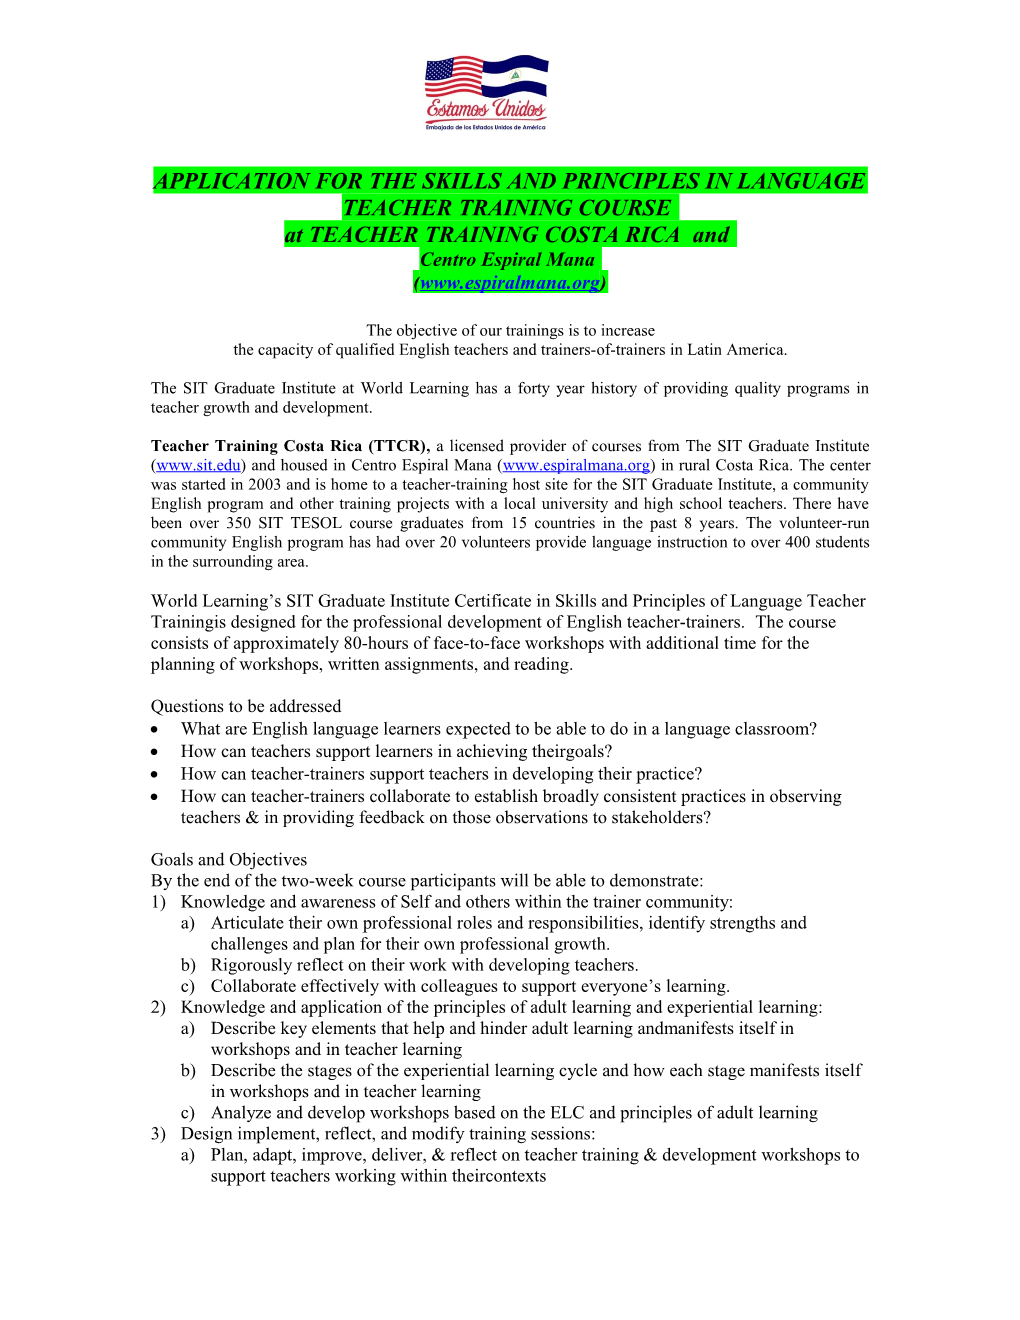 Application for the Skills and Principles in Language Teacher Training Course